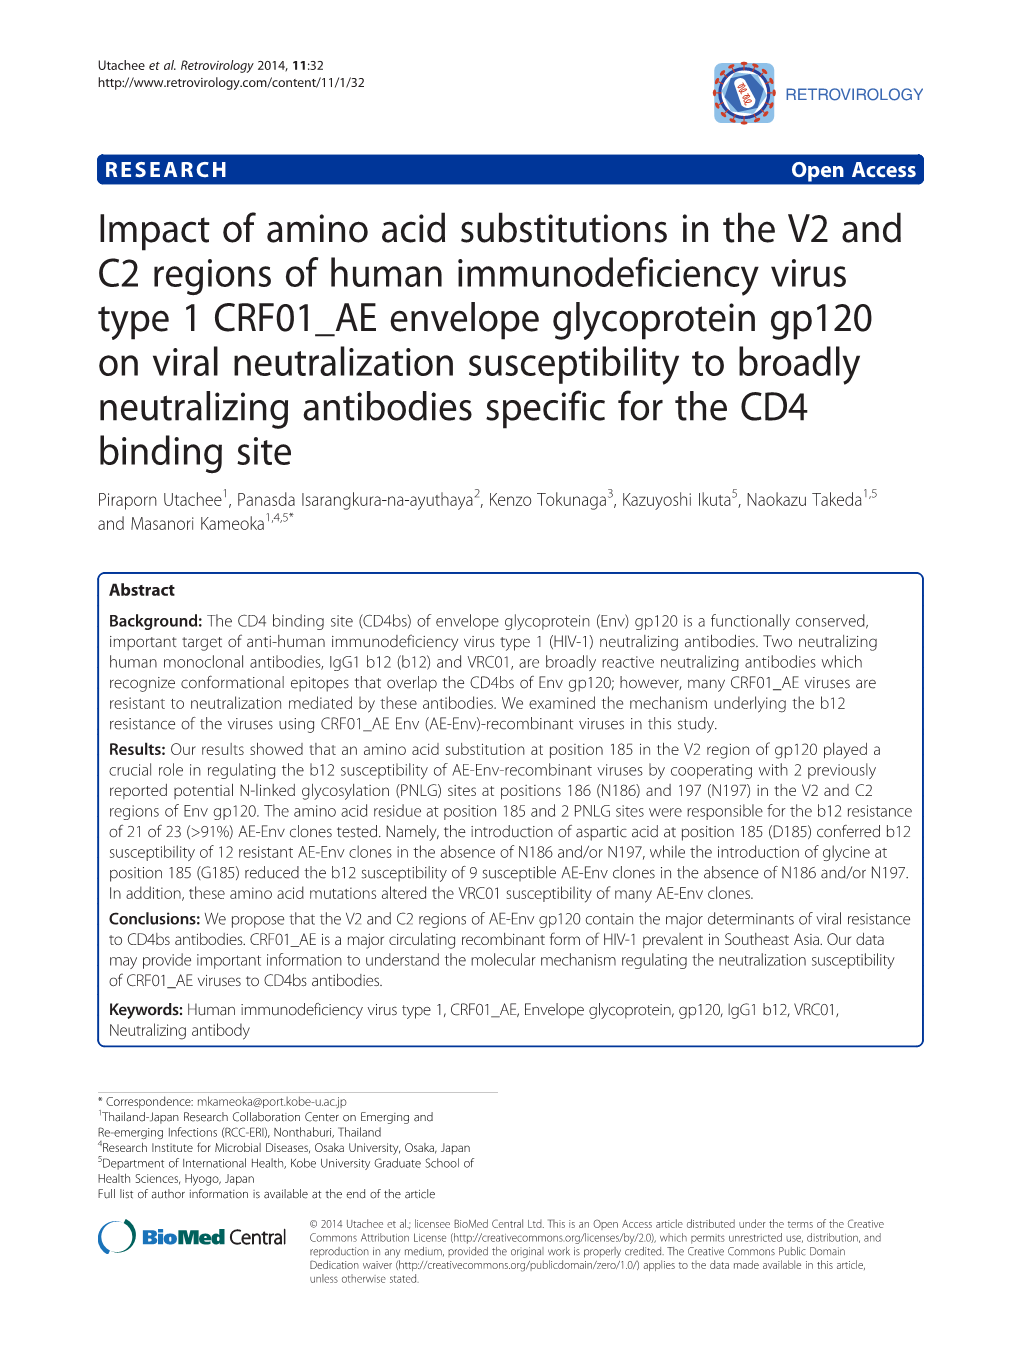 Impact of Amino Acid Substitutions in the V2 and C2 Regions of Human